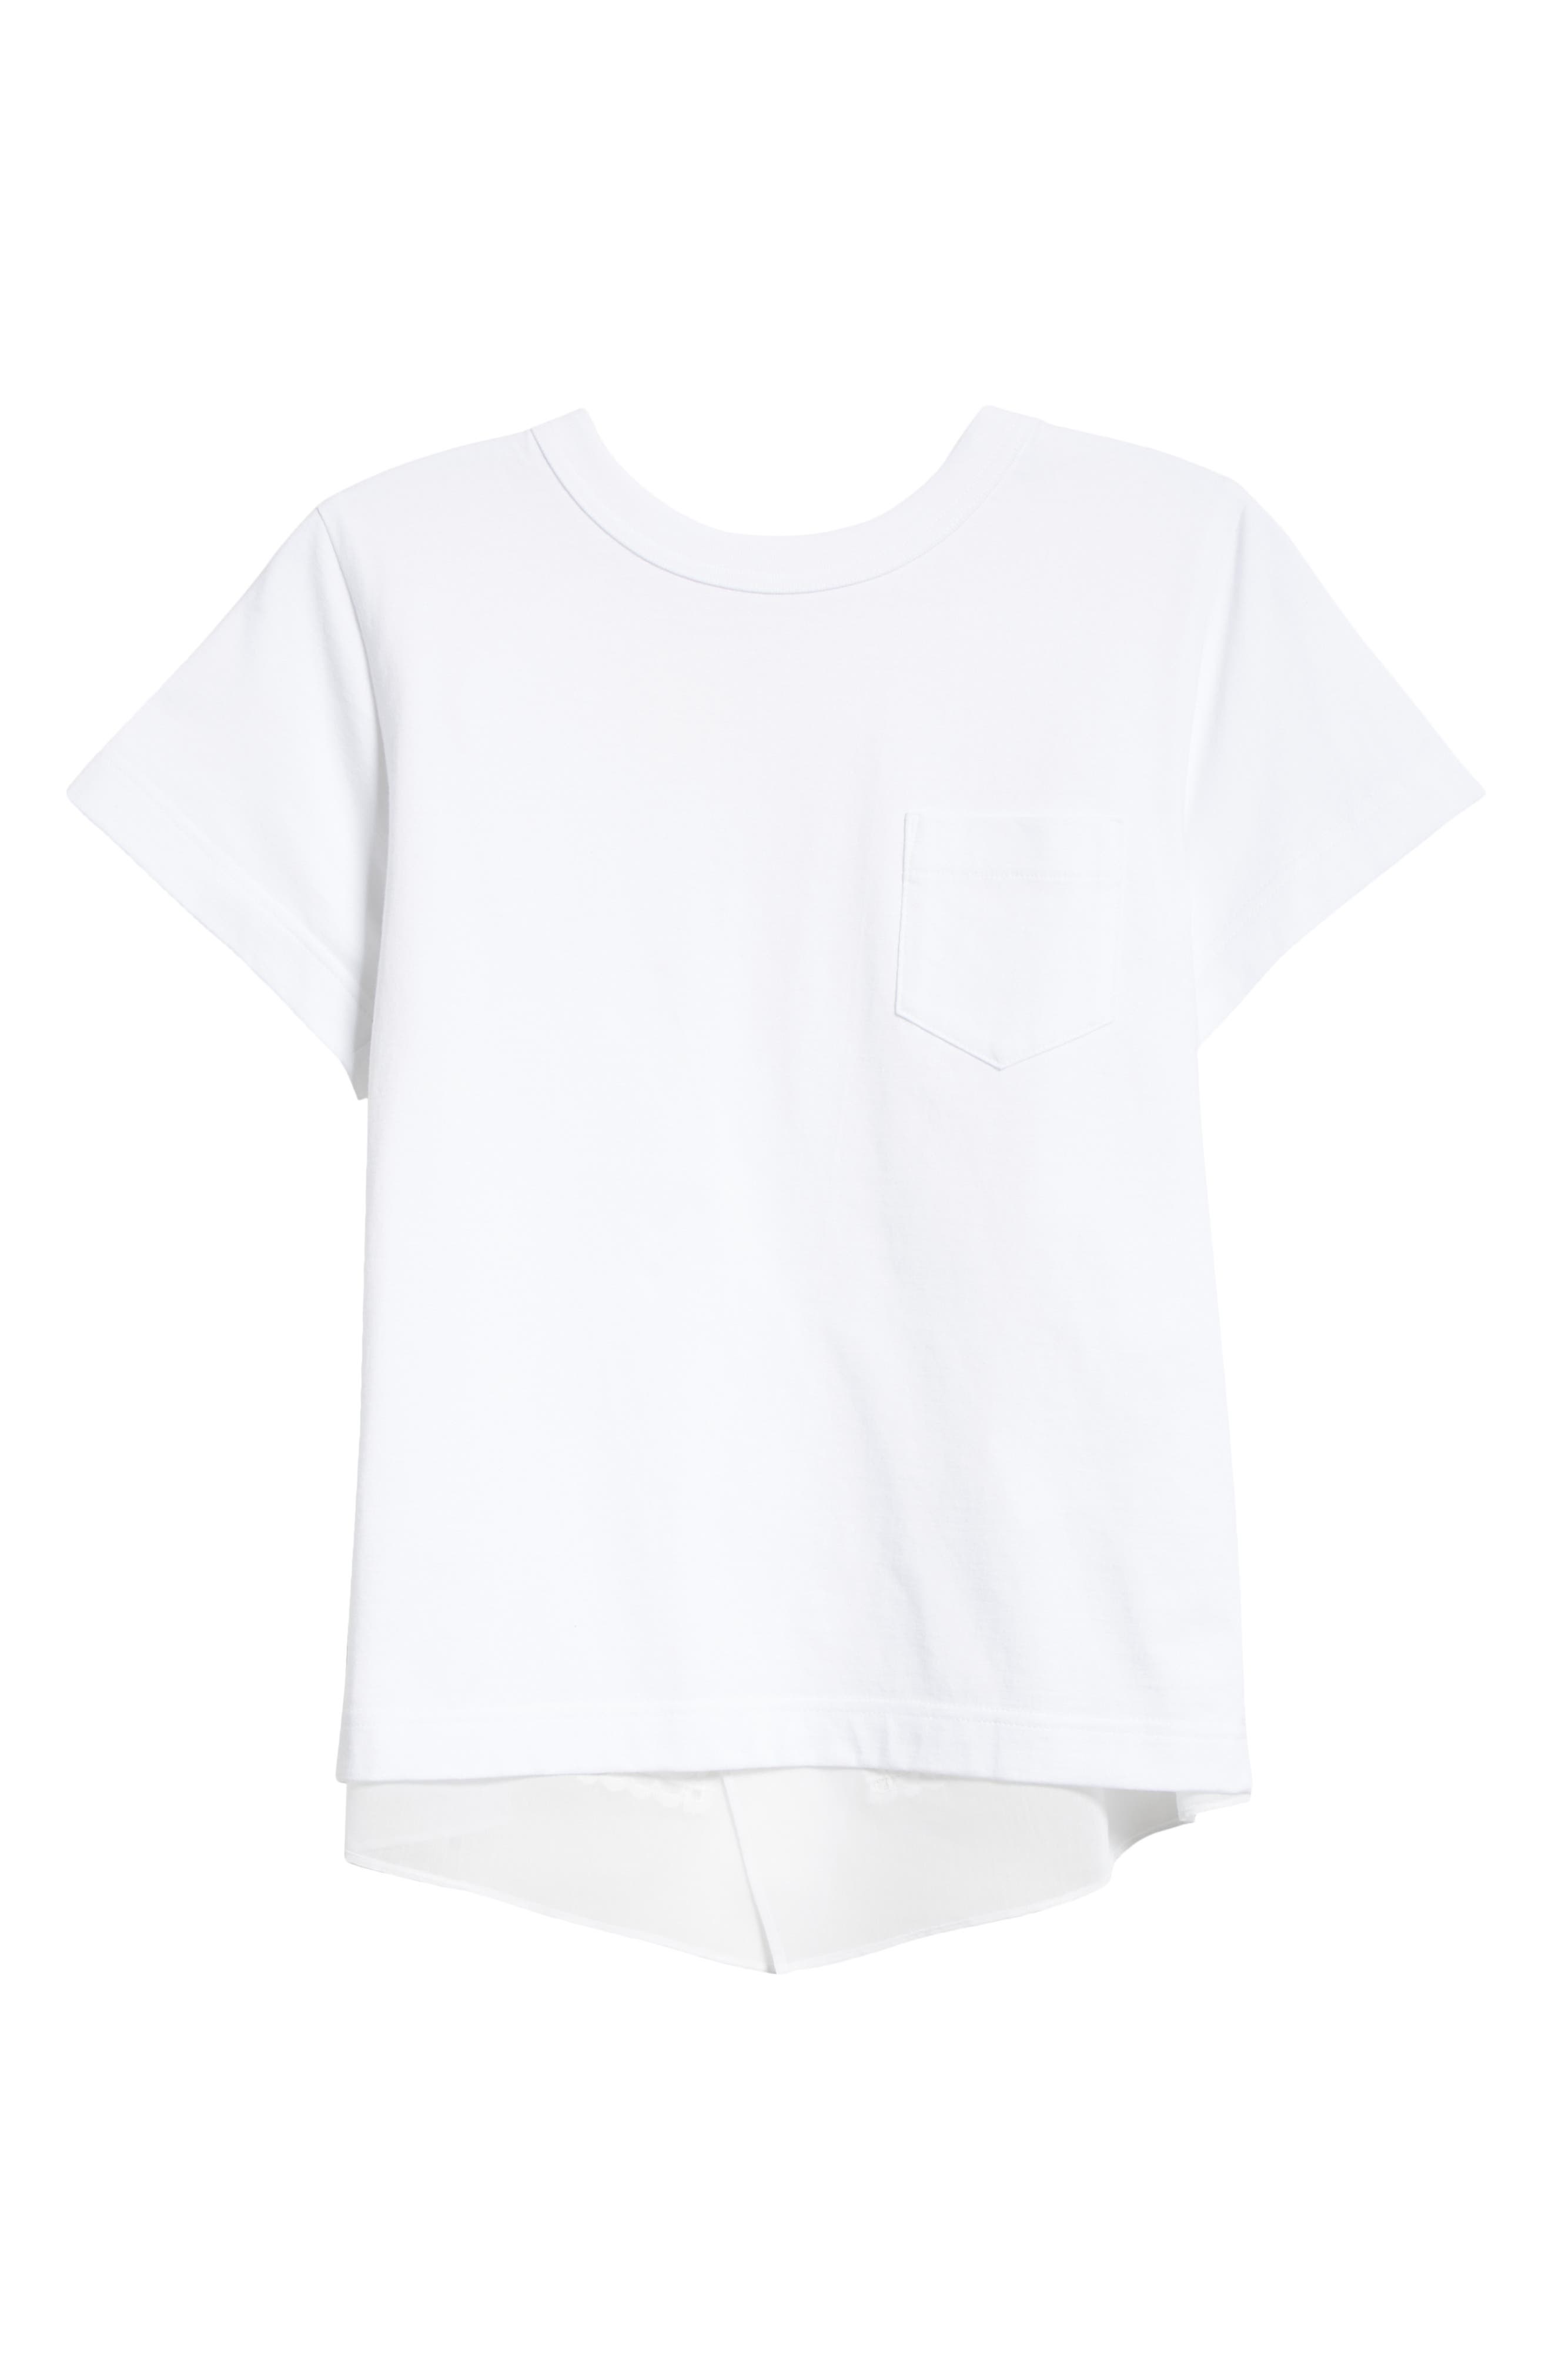 Sacai Bandana Lace Back T-Shirt in White at Nordstrom, Size 1